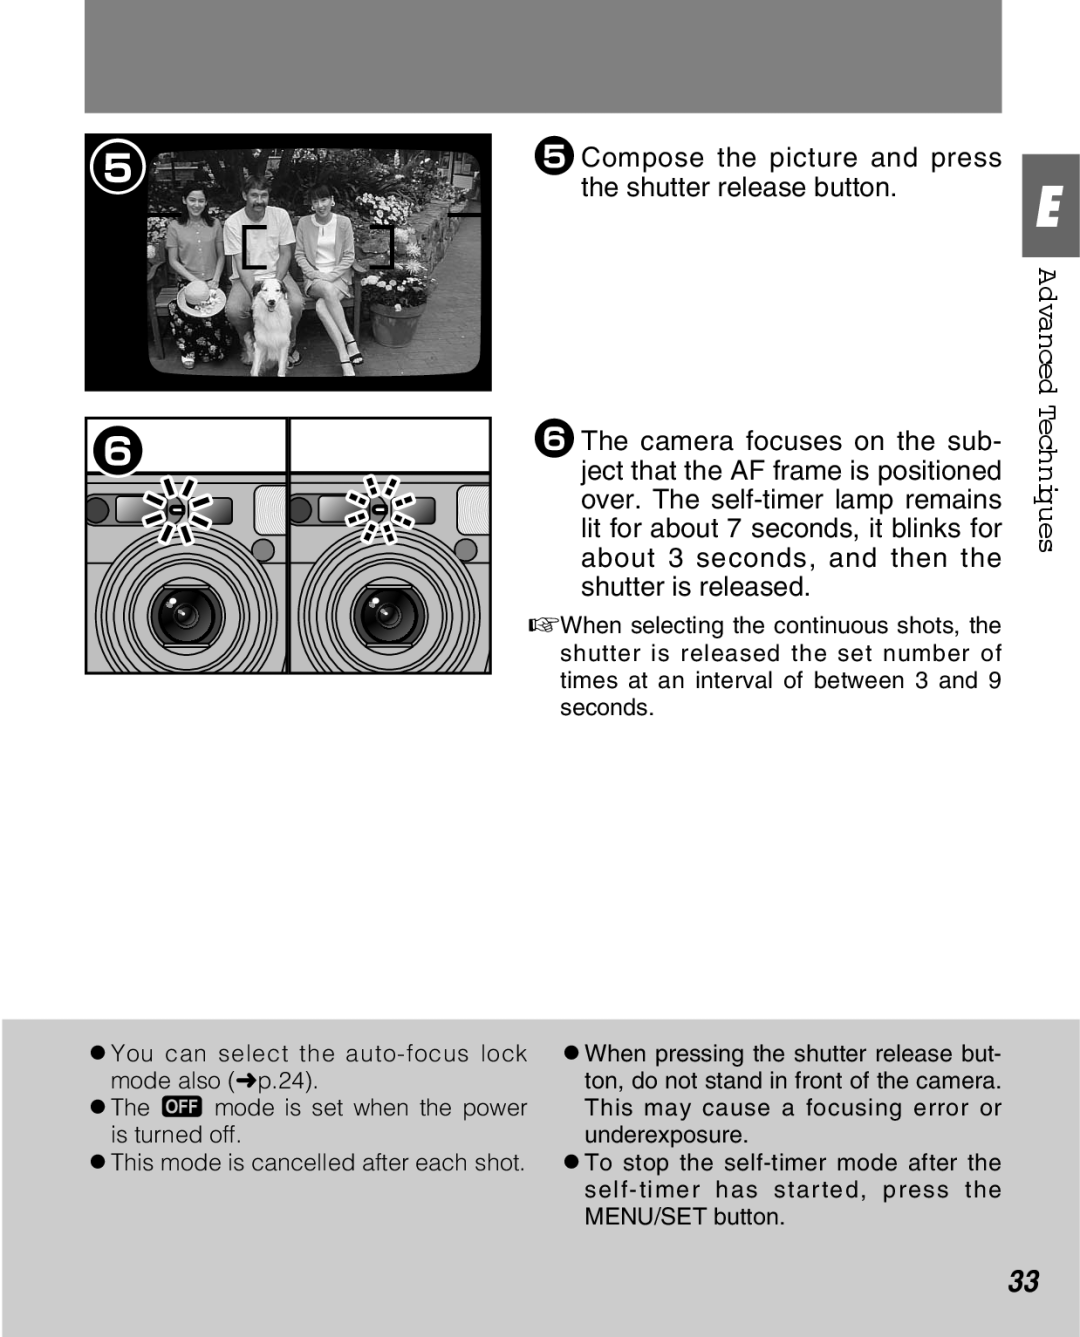 FujiFilm Zoom Date 160ez owner manual Advanced Techniques, 5Compose the picture and press the shutter release button 